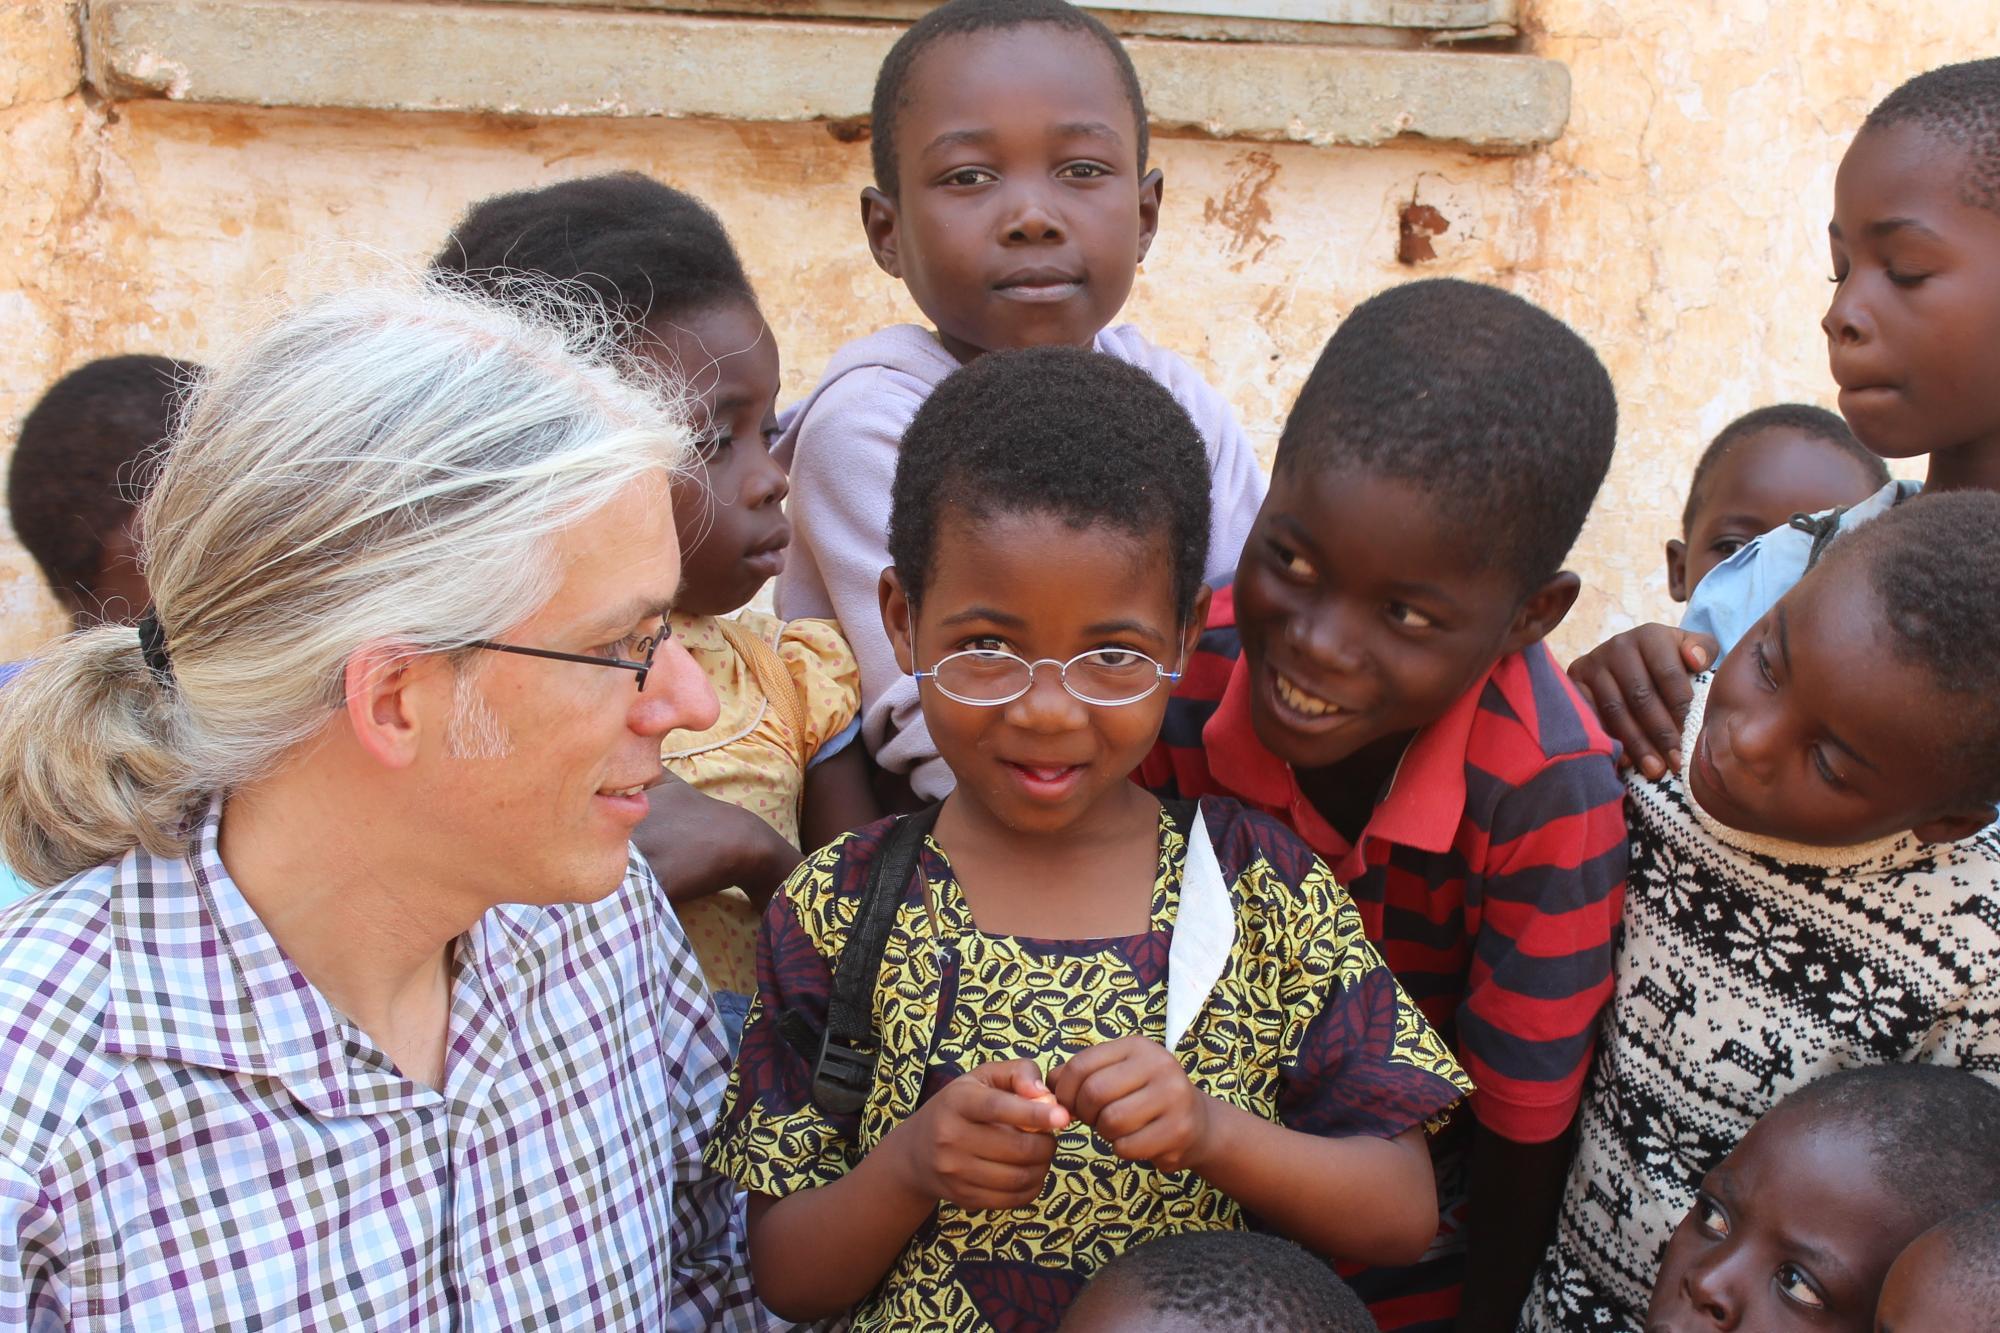 Martin Aufmuth surrounded by several children in Malawi